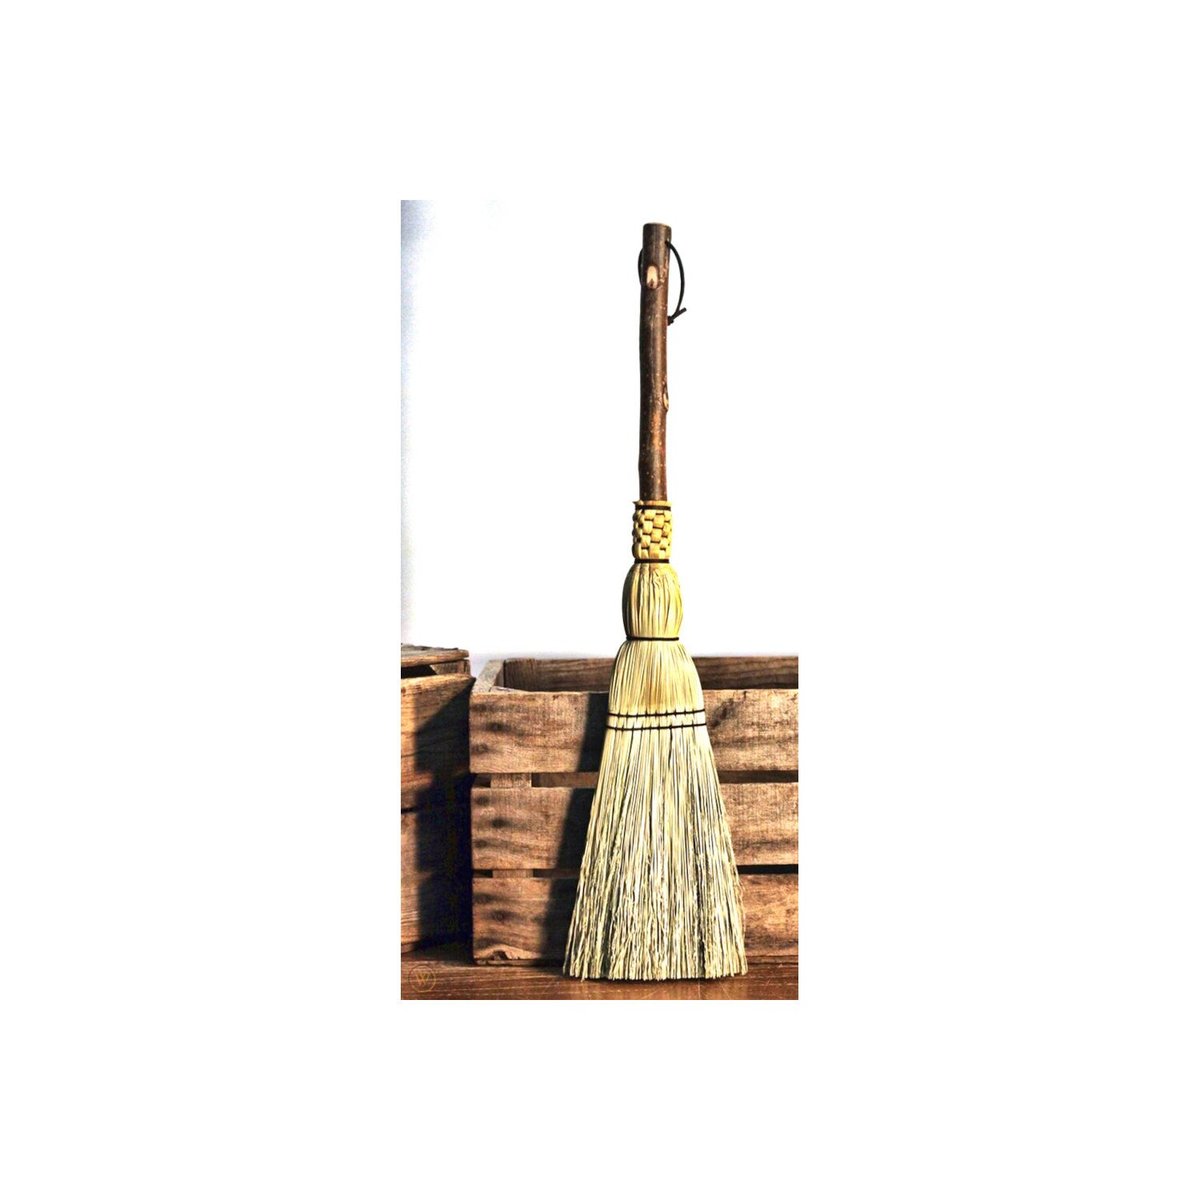 https://www.americanbroomshop.com/sites/rusticbroom.indiemade.com/files/styles/product_image/public/products/etsy/image_4757018764.jpg?itok=VriU2pnl